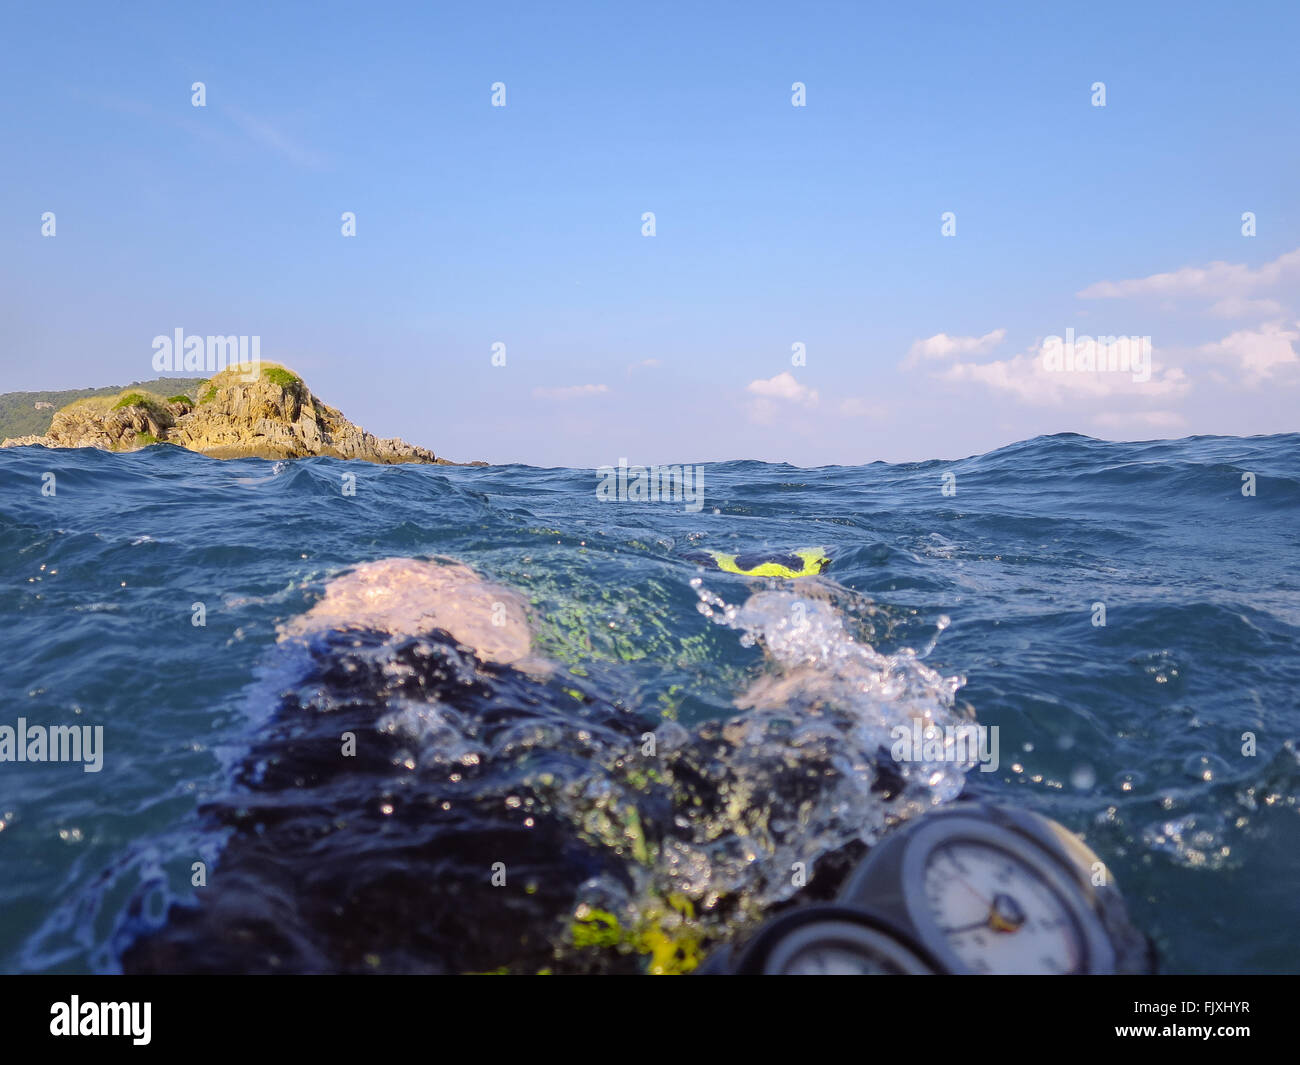 Person Scuba Diving At Sea Against Sky Stock Photo